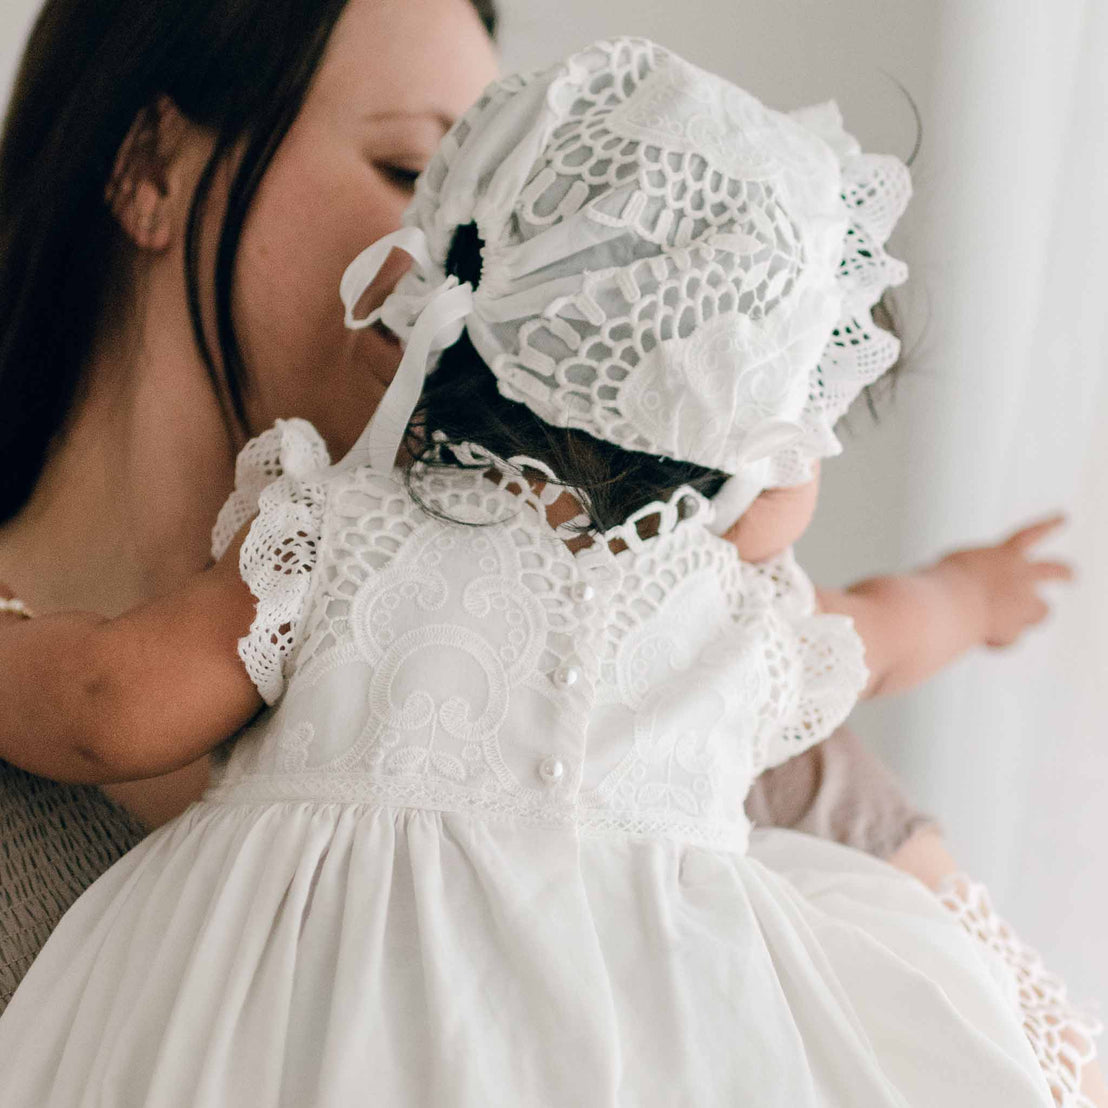 Photo of a baby wearing a Lily Christening Gown & Bonnet. She is held by her mom and the photo showcases the back of the bodice and bonnet designs